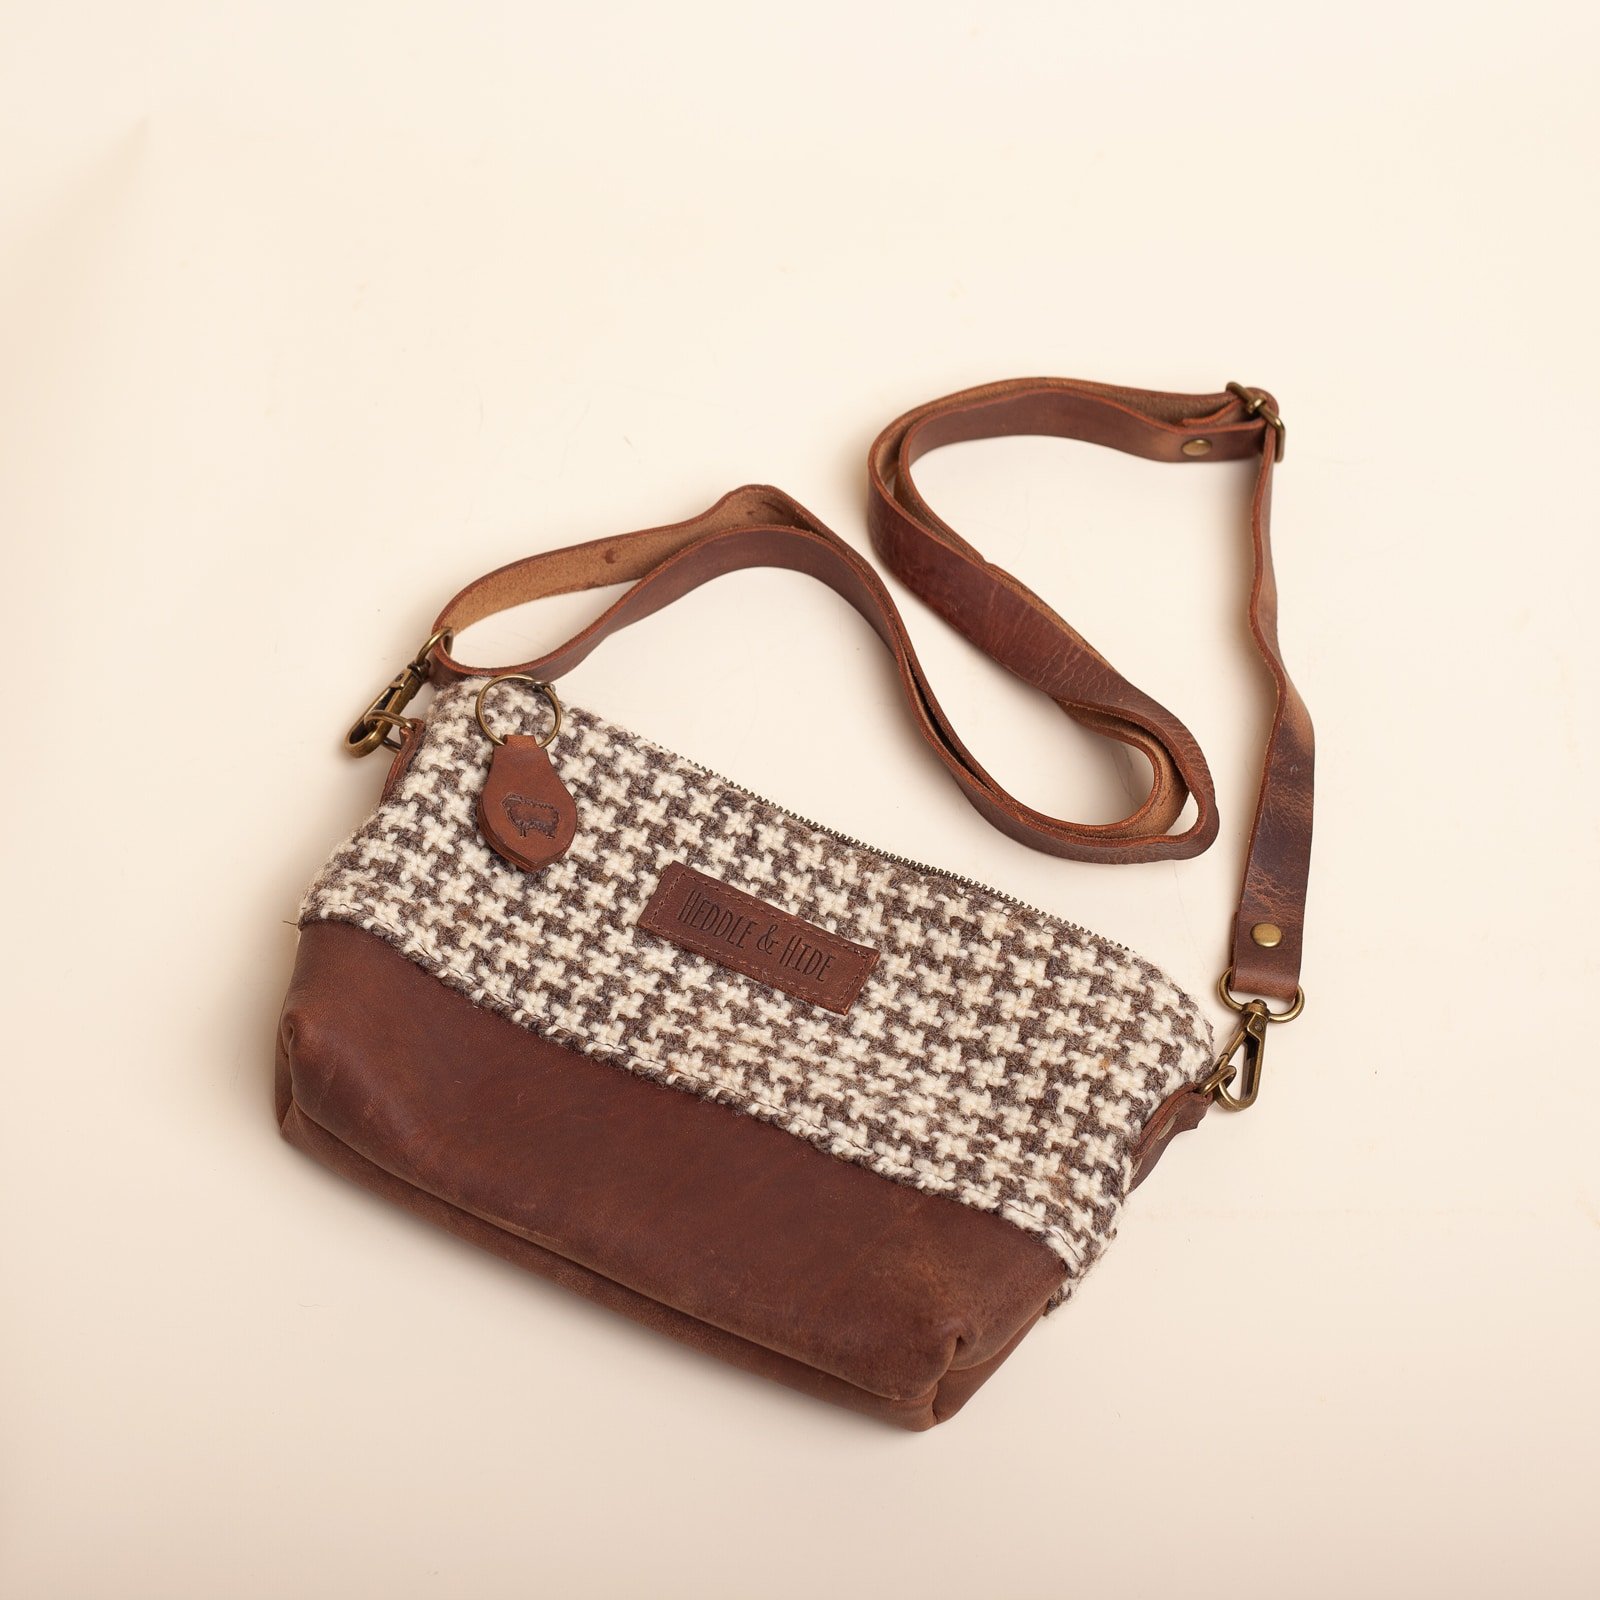 classic houndstooth crossbody bag with wool fabric and leather